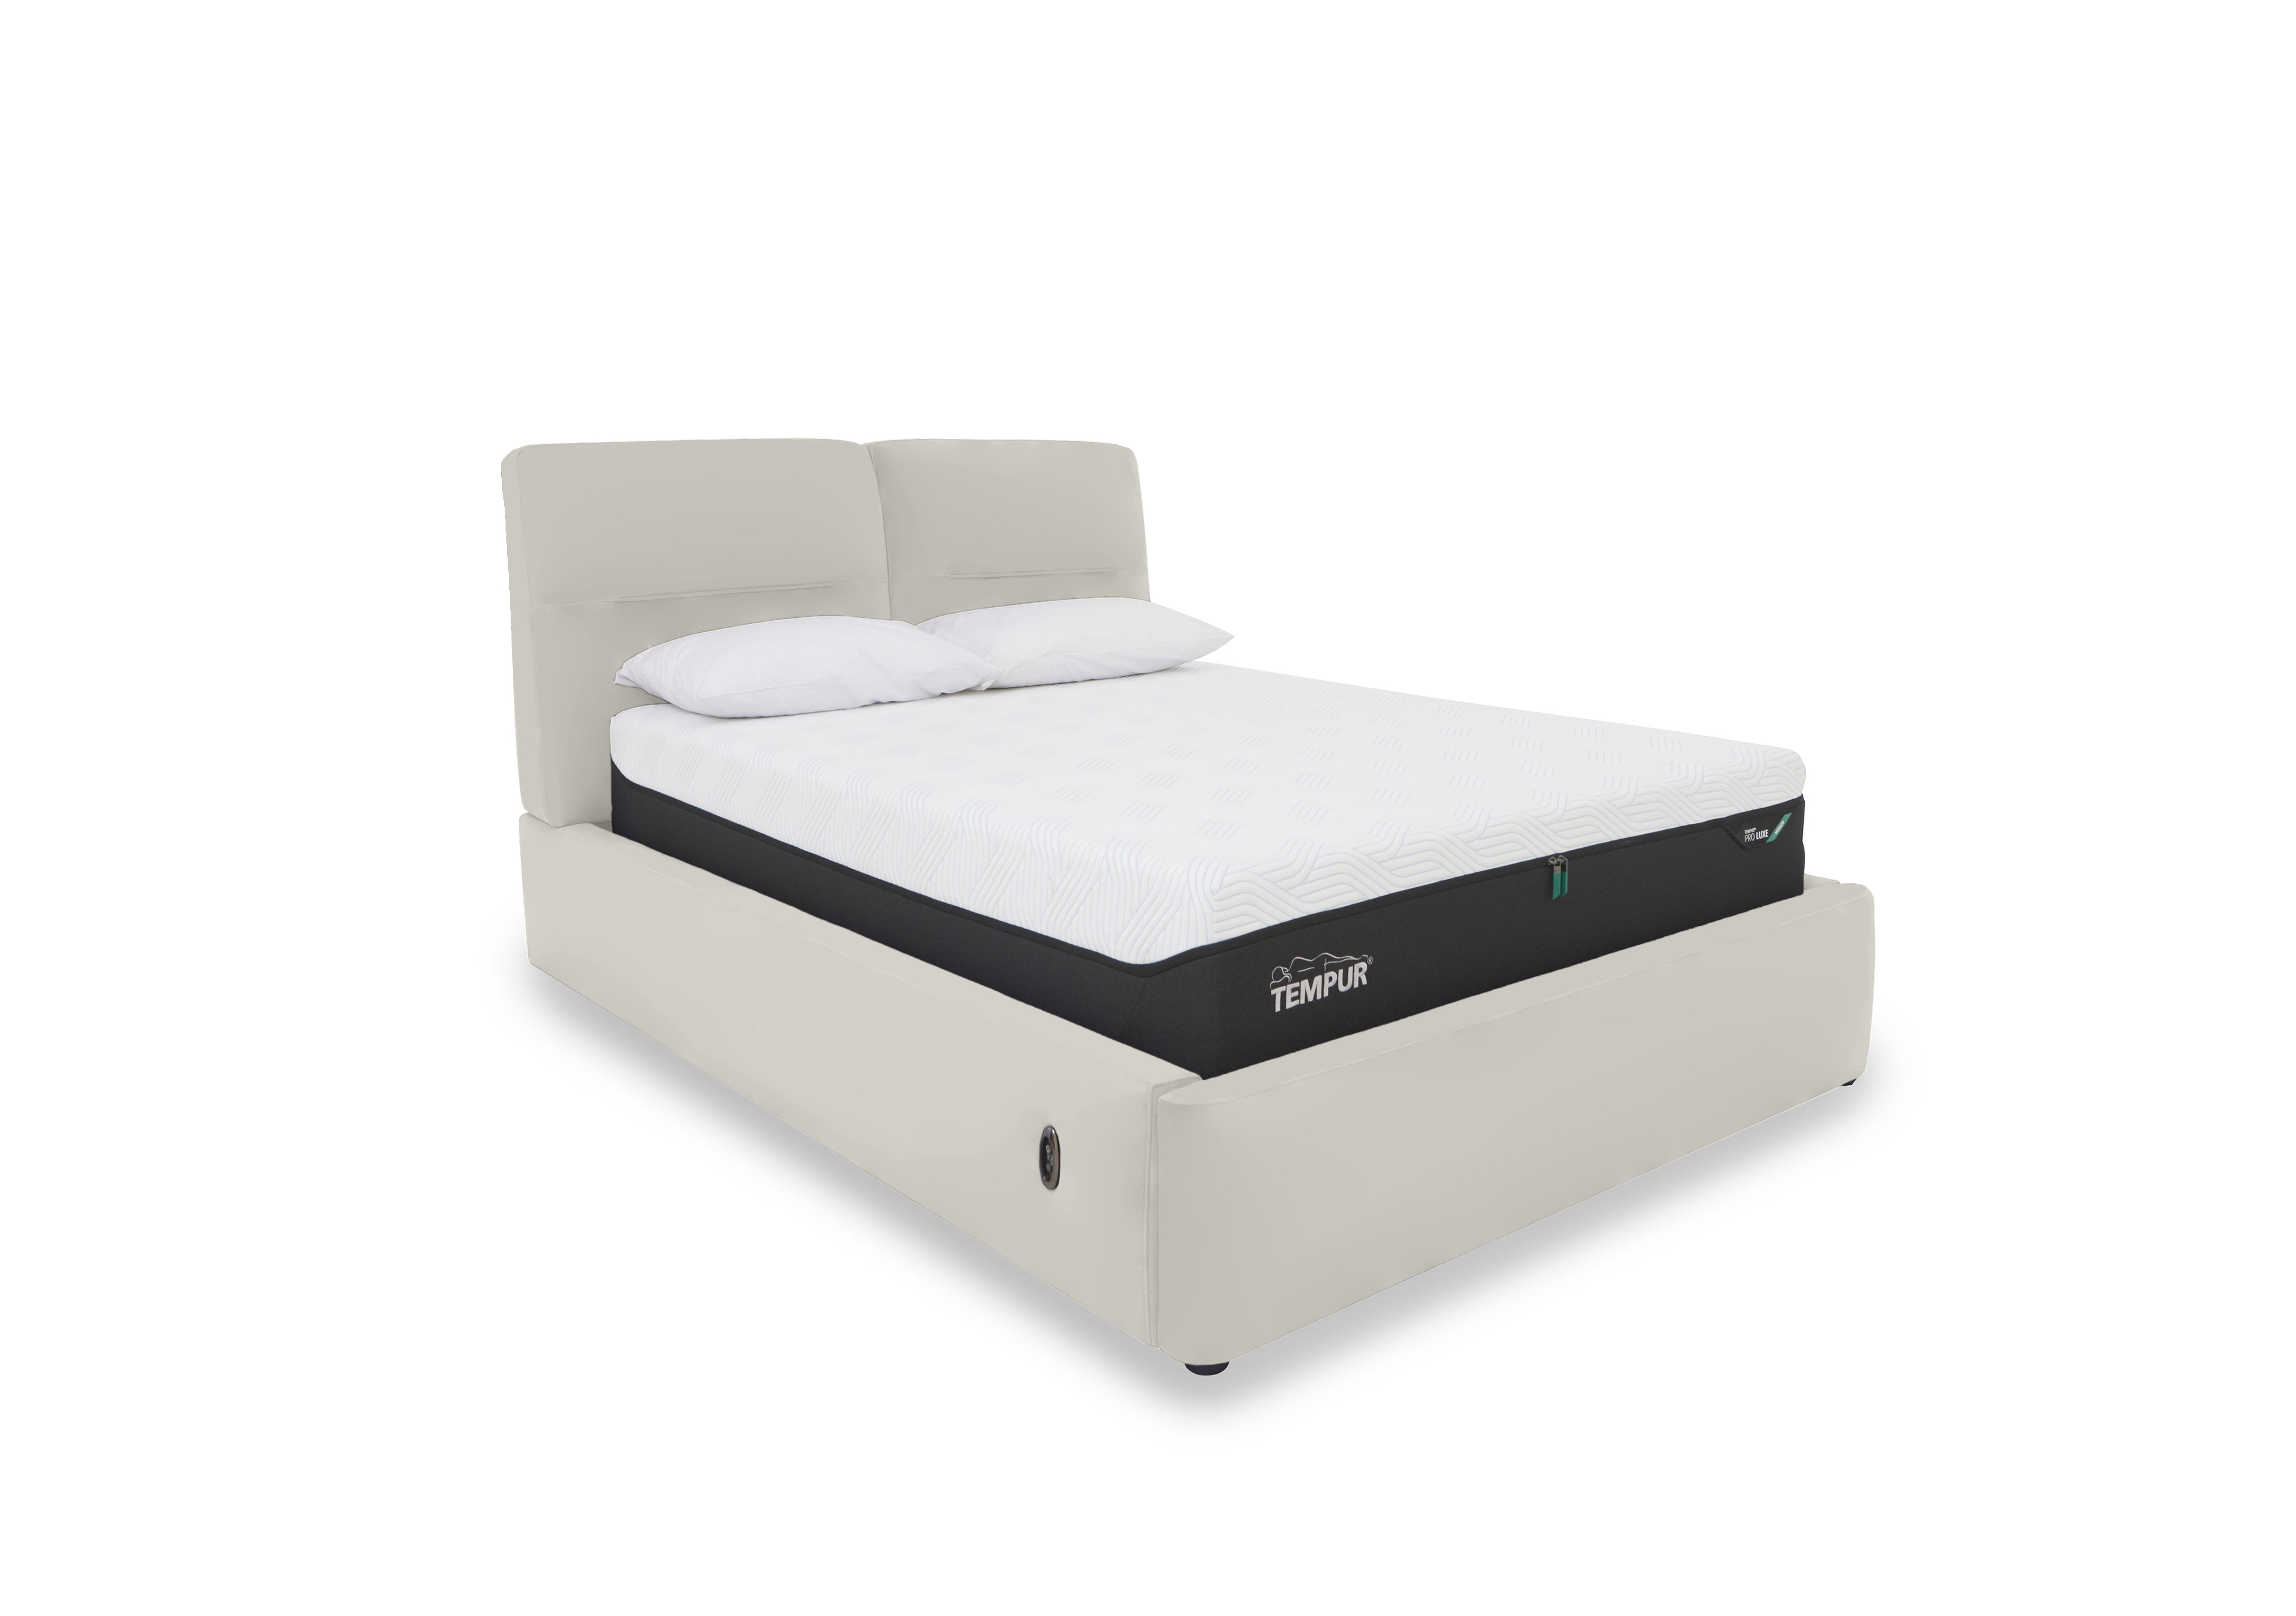 Stark Leather Electric Ottoman Bed Frame in Nw-521e Frost on Furniture Village